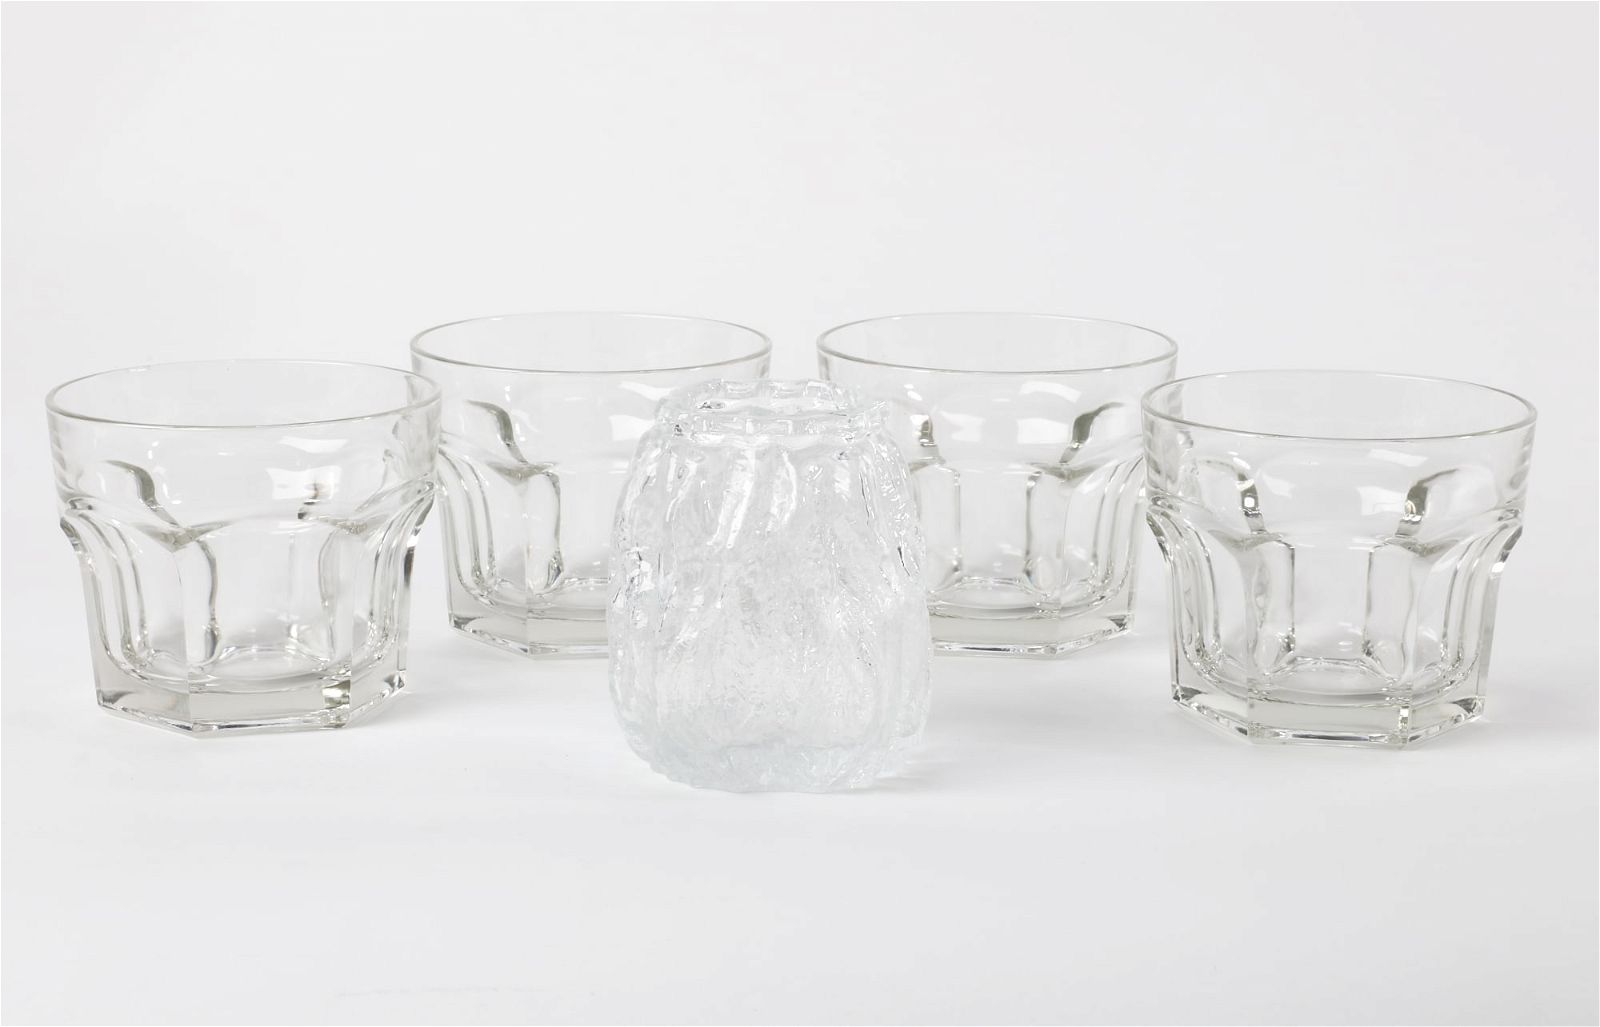 FOUR ITALIAN GLASS TUMBLERS WITH